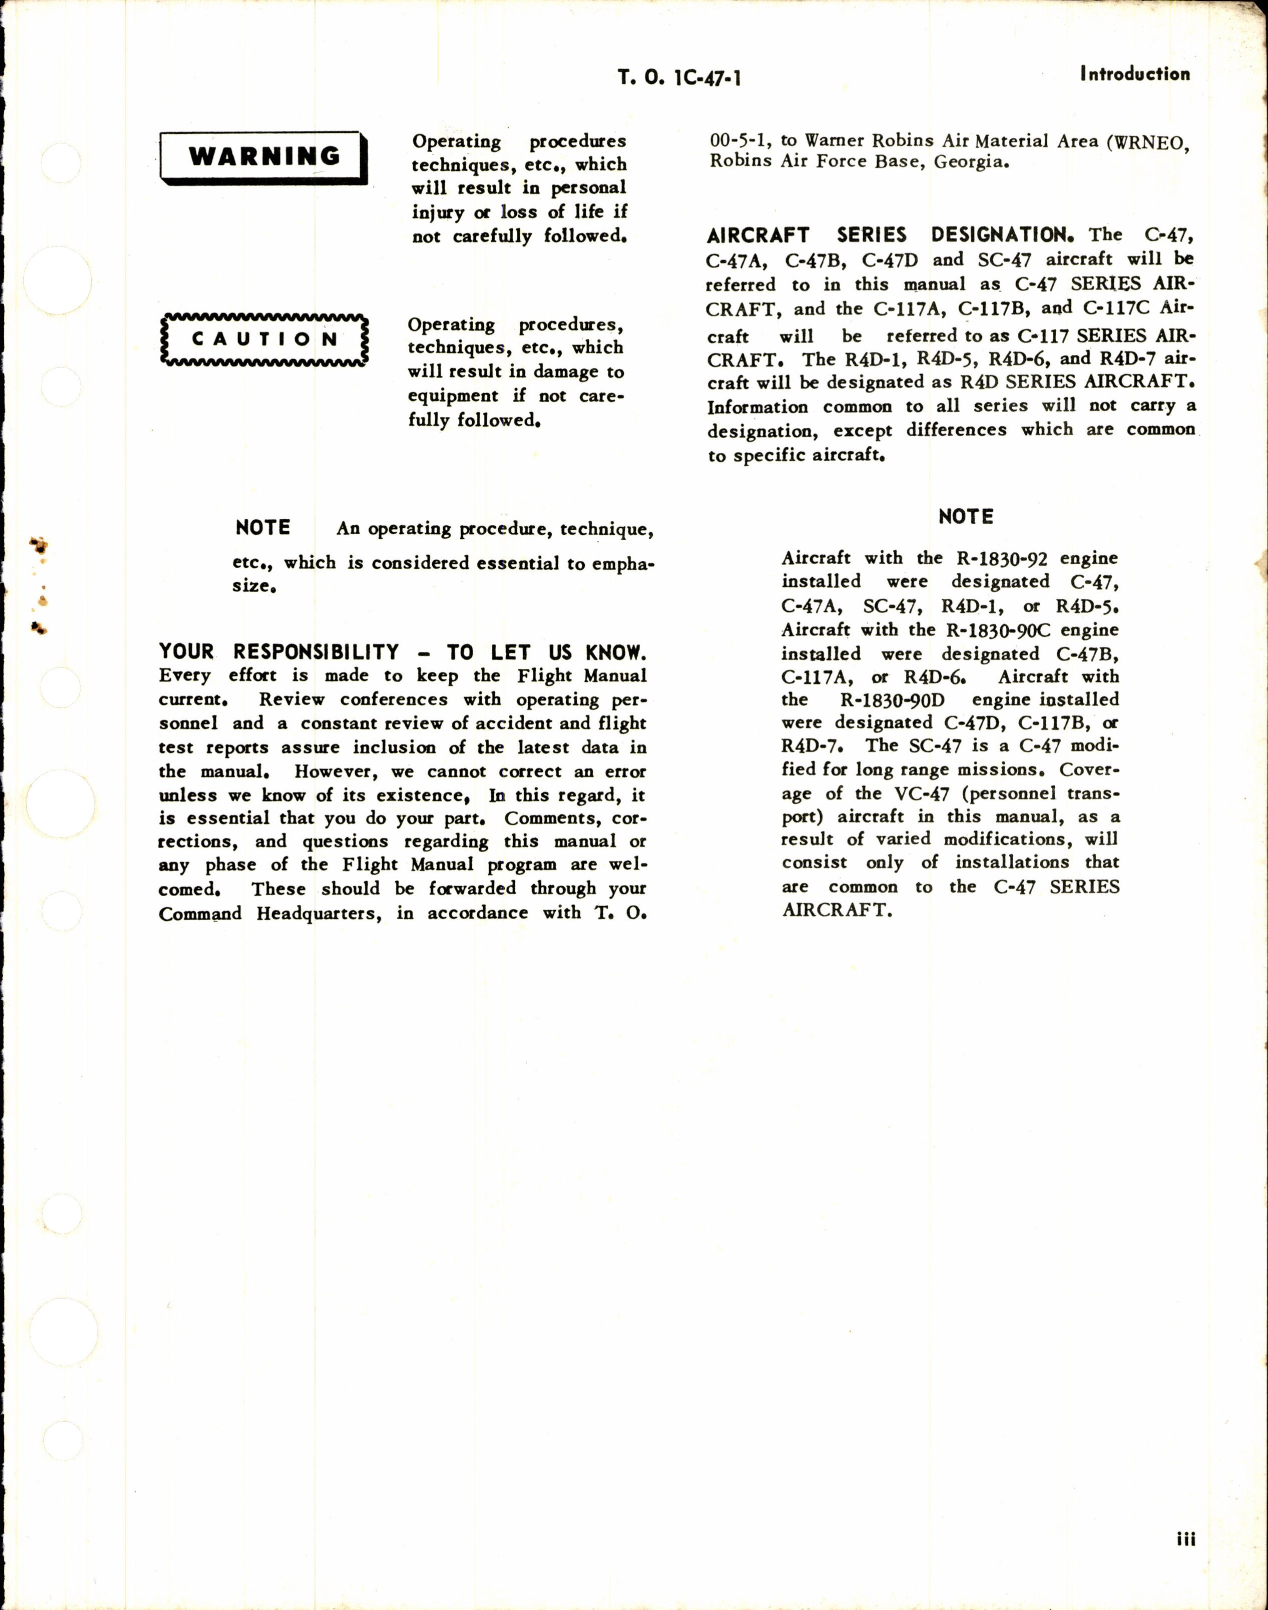 Sample page 5 from AirCorps Library document: Flight Manual for C-47